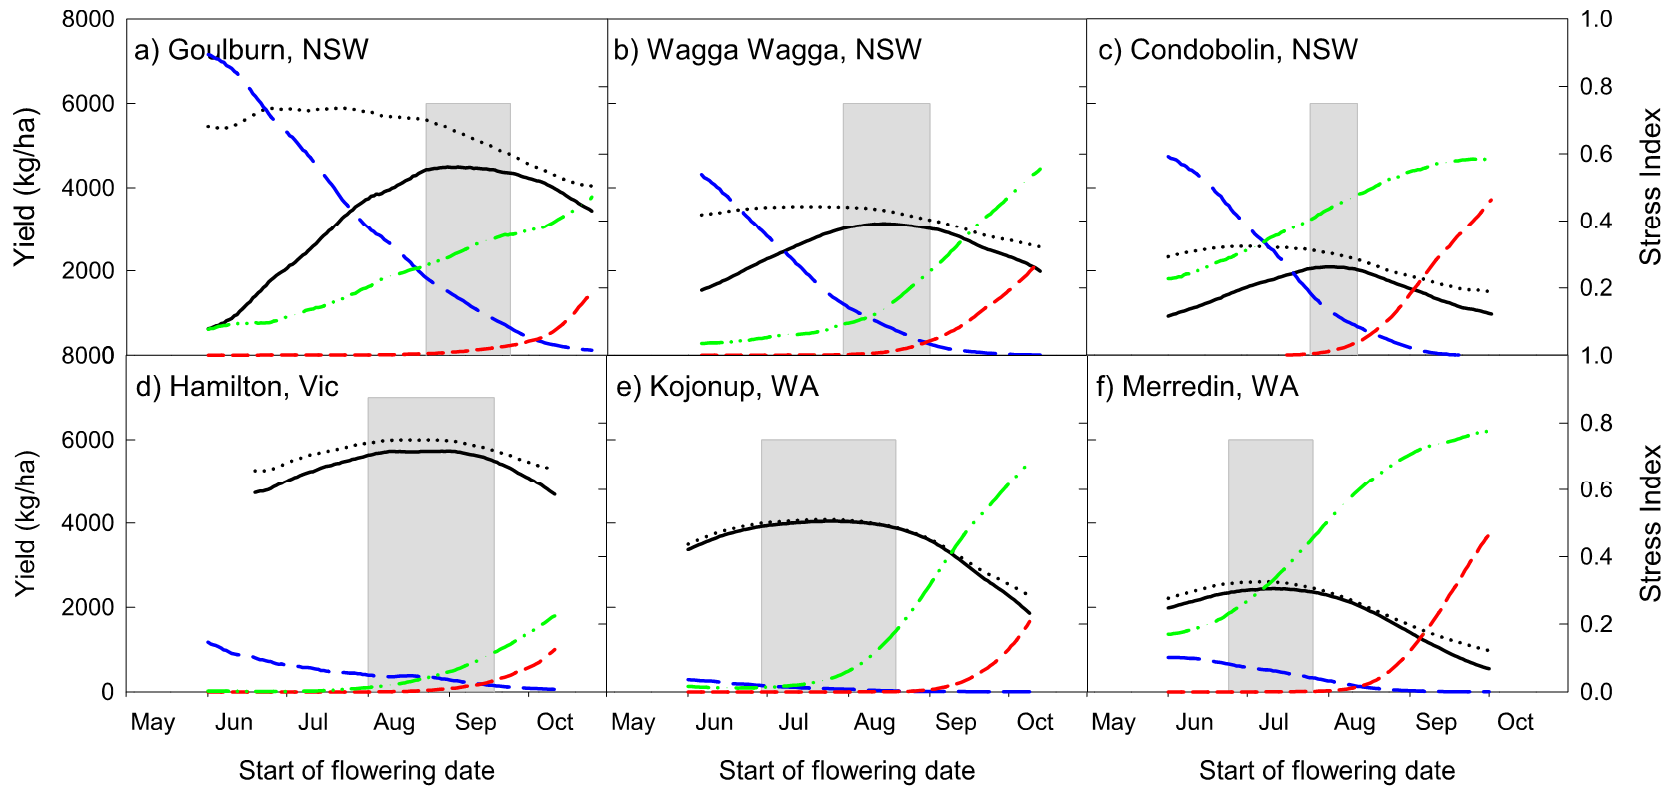 Multiple line graphs showing the optimal time to start flowering in different regions around Australia. Showing the simulated potential yield: no frost or heat limitation (black dotted), with frost or heat limitation (solid black). Frost potential (blue long dash), heat stress potential (red short dash) and water limited potential (green dash-dot-dot). The grey box represents the optimum time to start flowering to achieve 95% of the water limited yield potential.